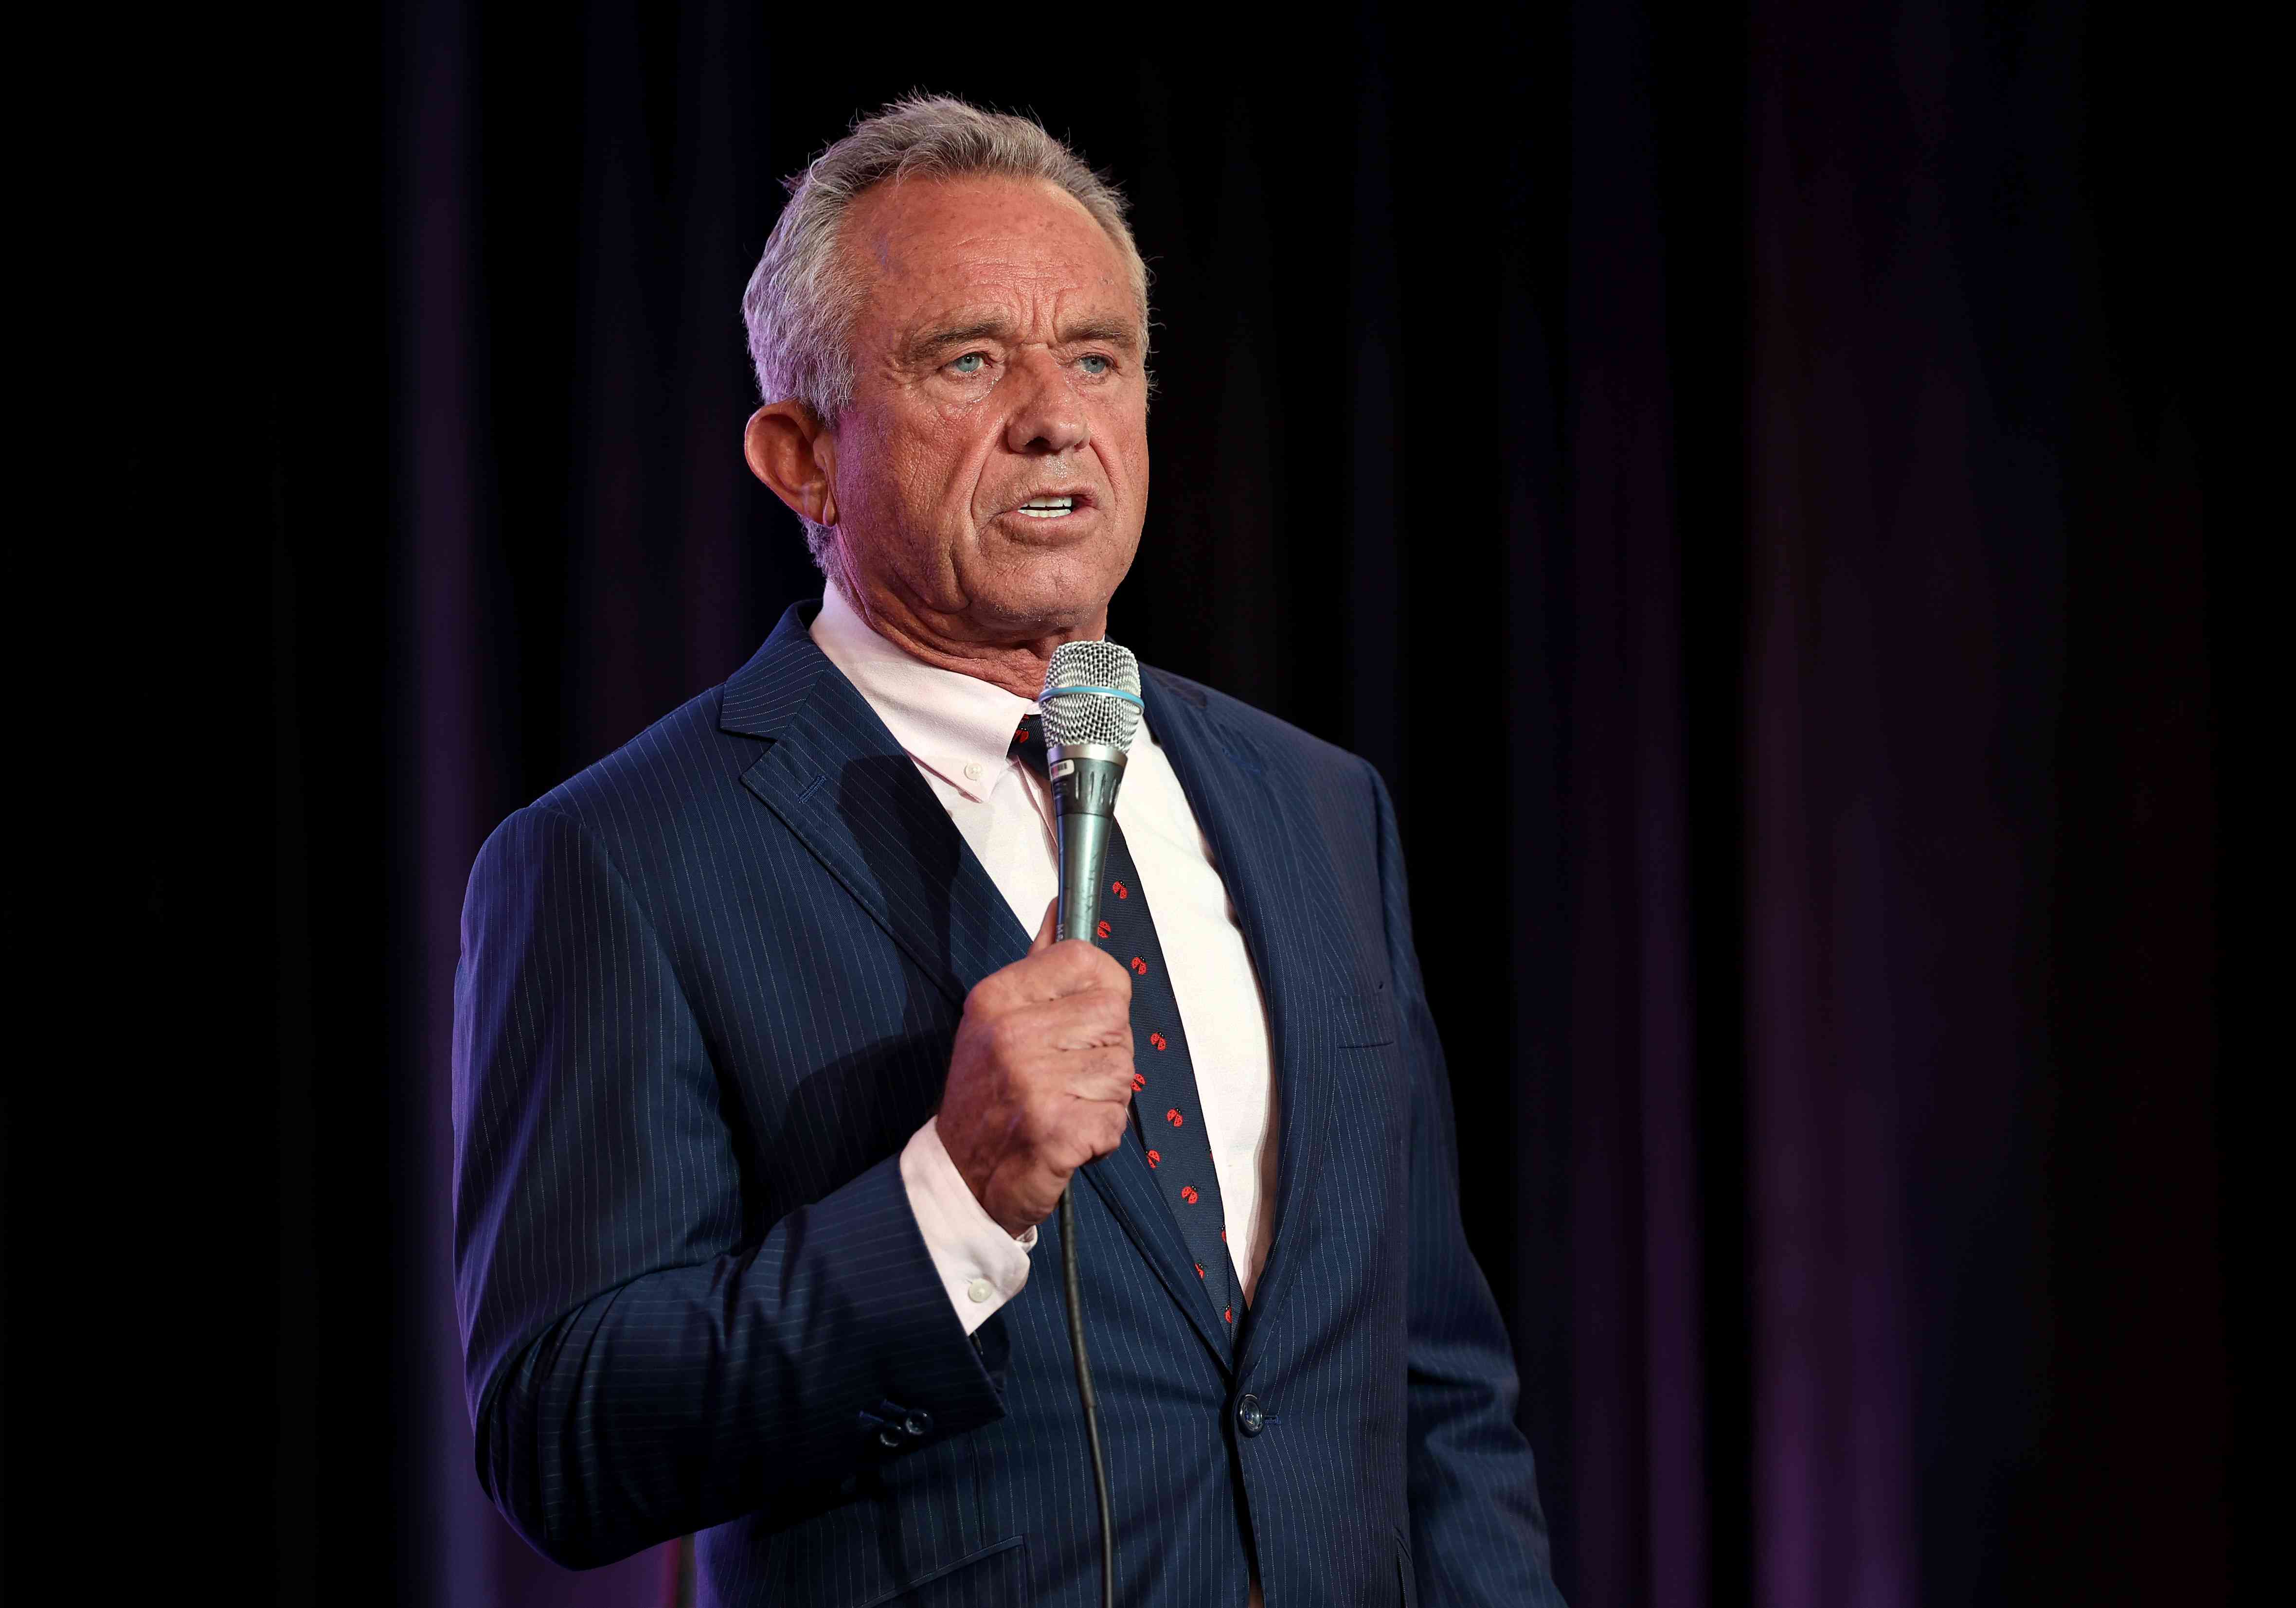  Independent presidential candidate Robert F. Kennedy Jr. speaks at the Libertarian National Convention